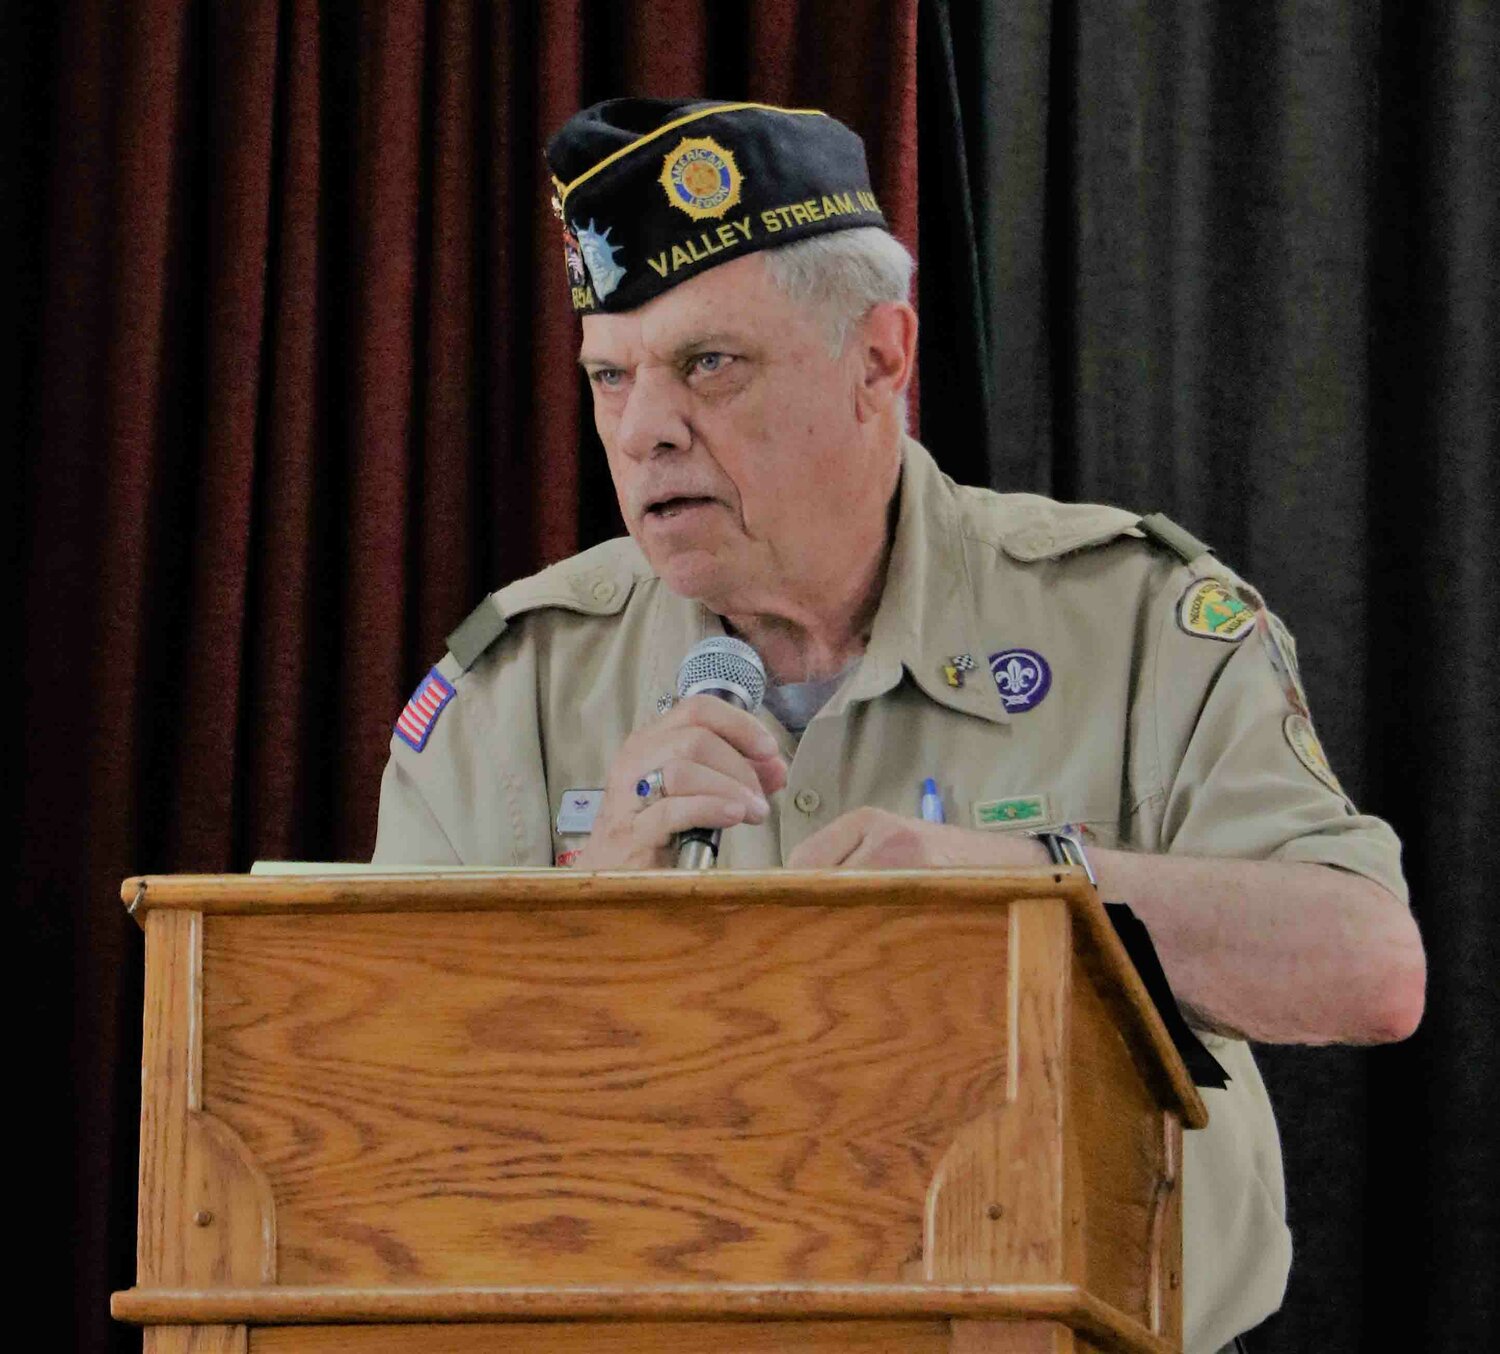 George Schuchman presented citations to the Eagle Scouts at their Eagle Court of Honors on May 13.